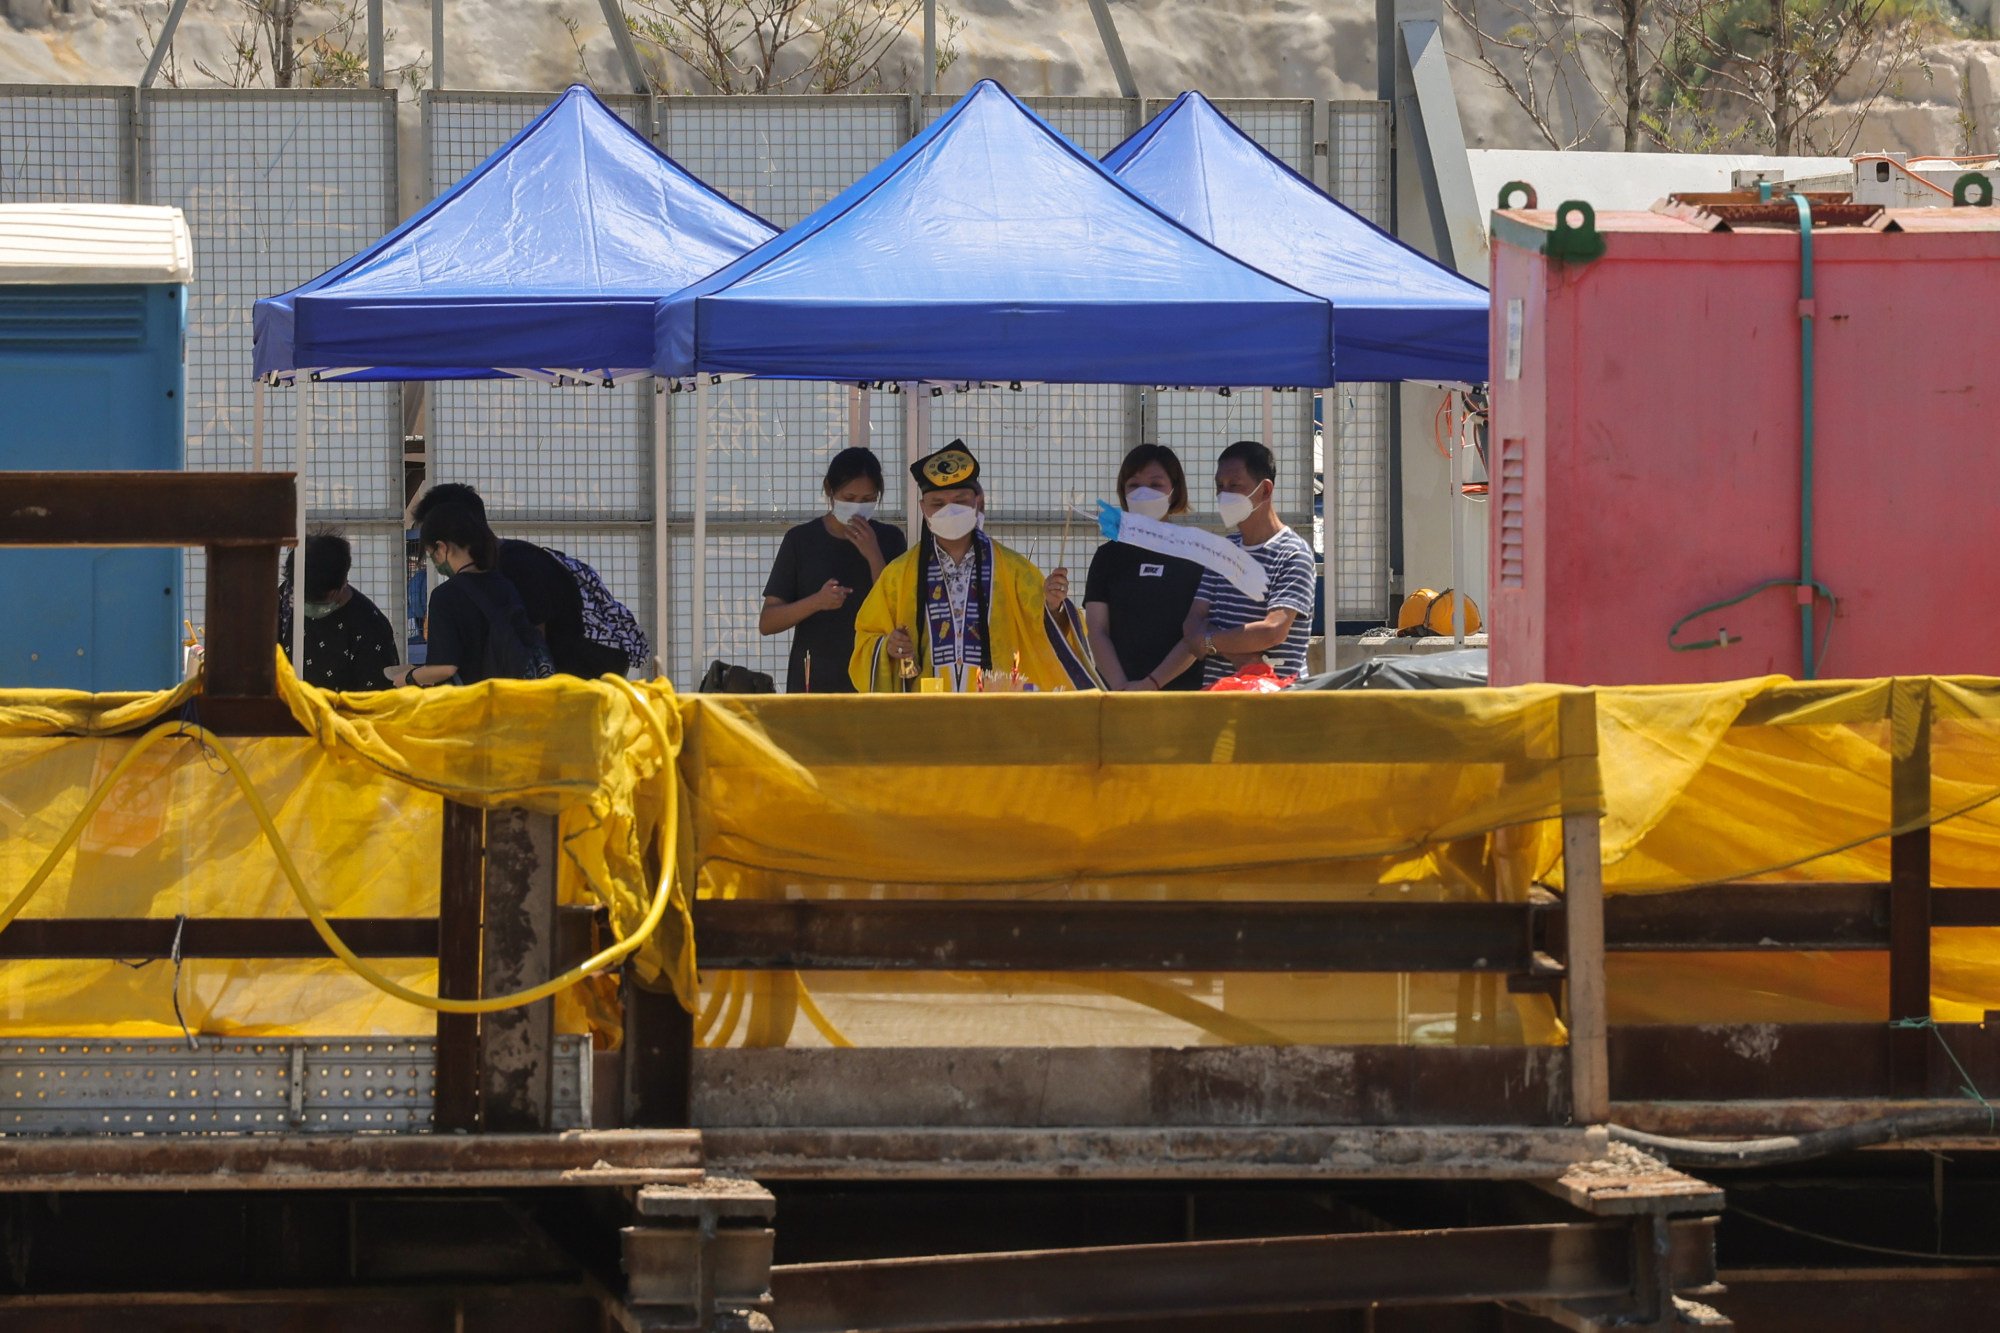 A ritual being conducted at the site for one of the dead victims. Photo: Jelly Tse